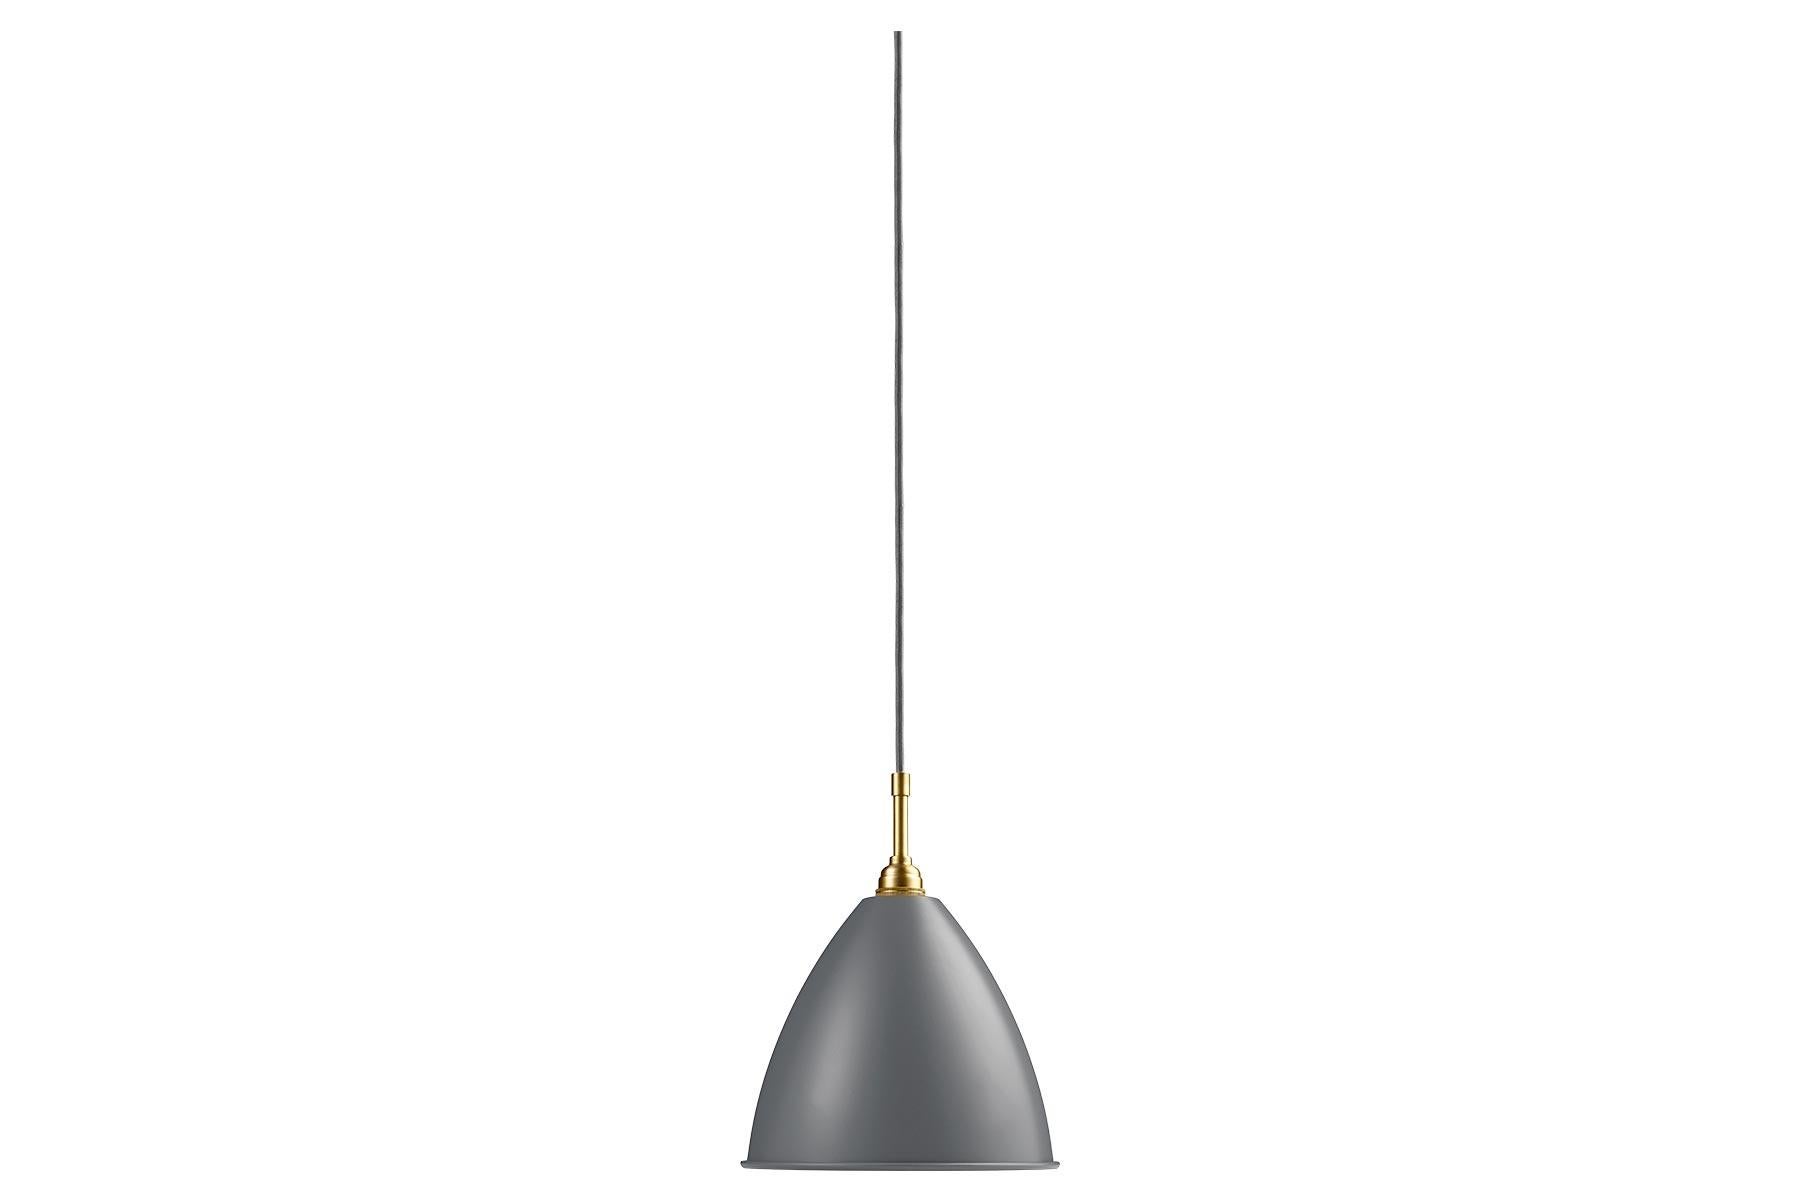 The Bestlite BL9 pendant in four sizes and in a numerous of finishes was designed in 1930 by the Bauhaus influenced British designer Robert Dudley Best. With its great heritage and contemporary look, the BL9 pendant is a coveted design worldwide.